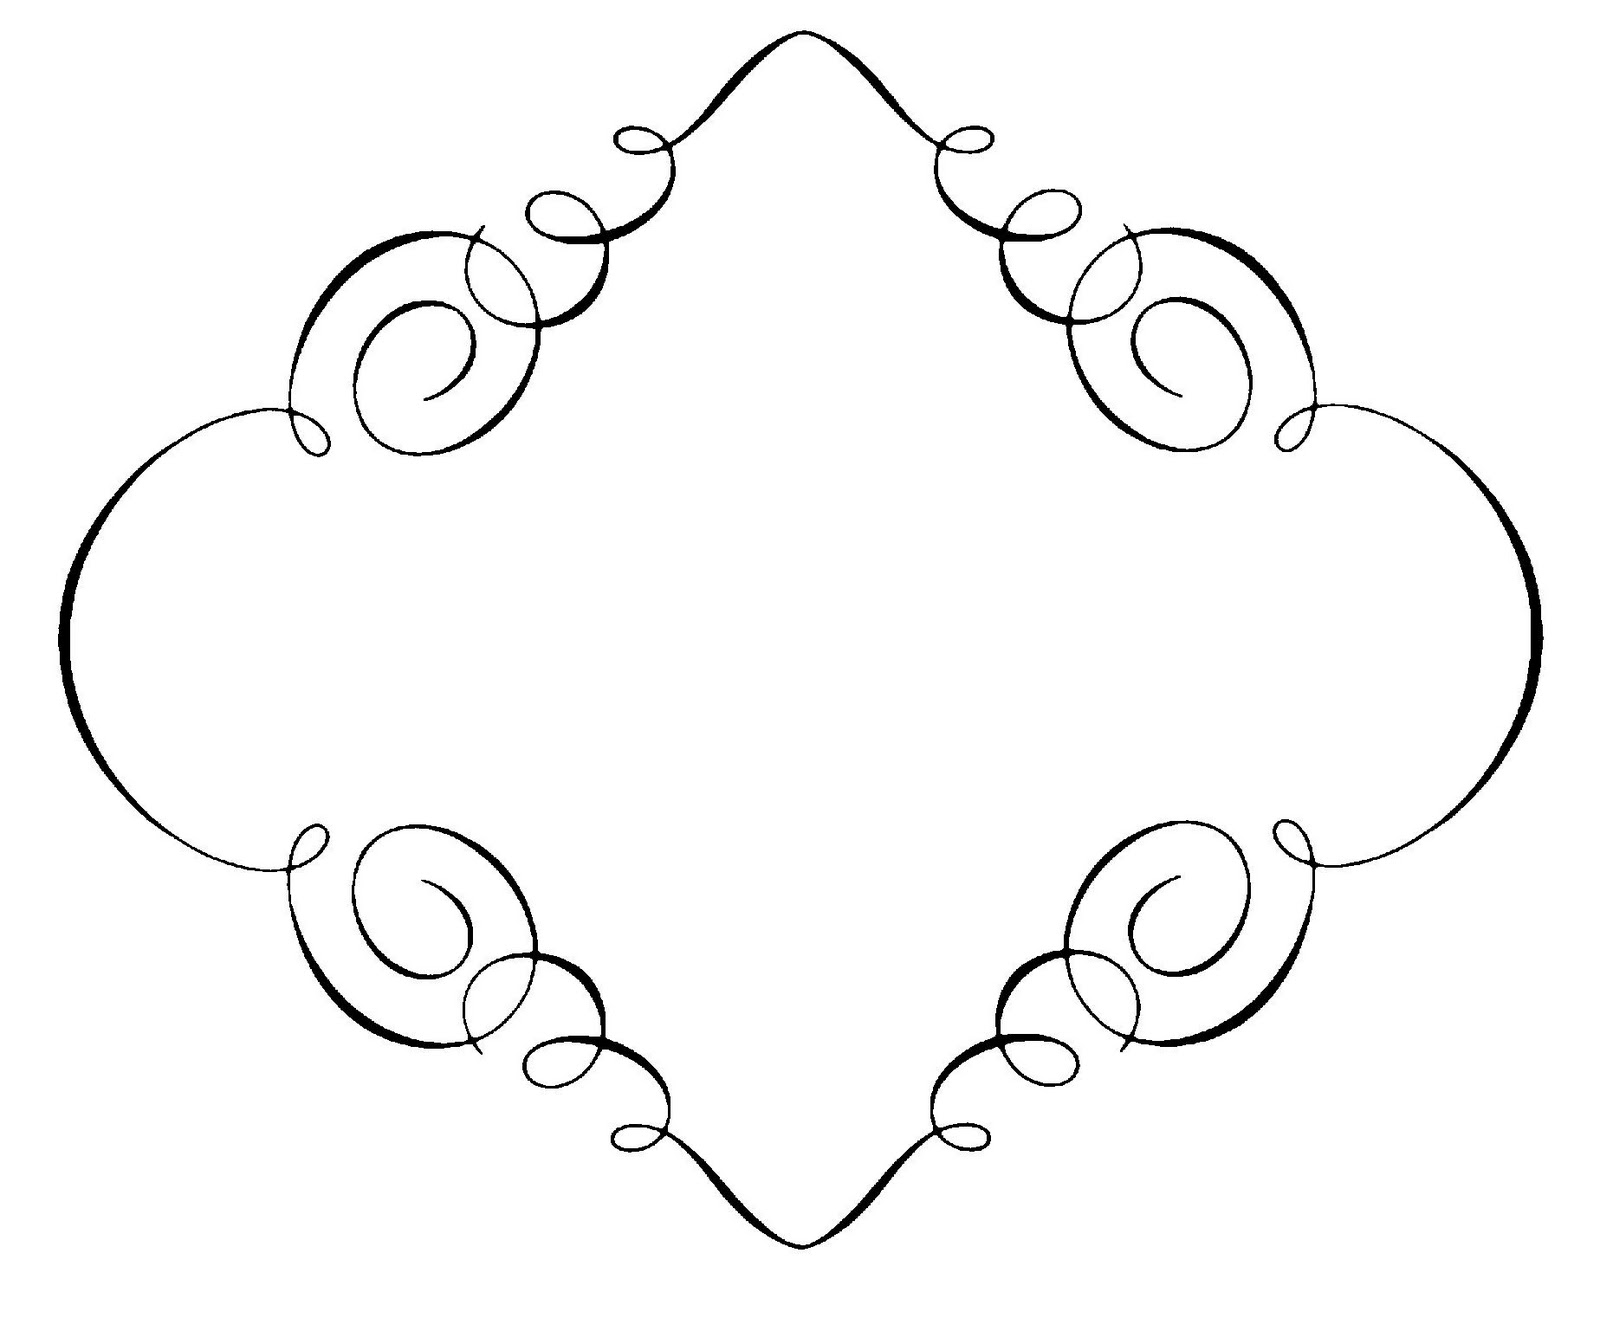 Floral Scroll Frame Clip Art Free Download - ClipArt Best